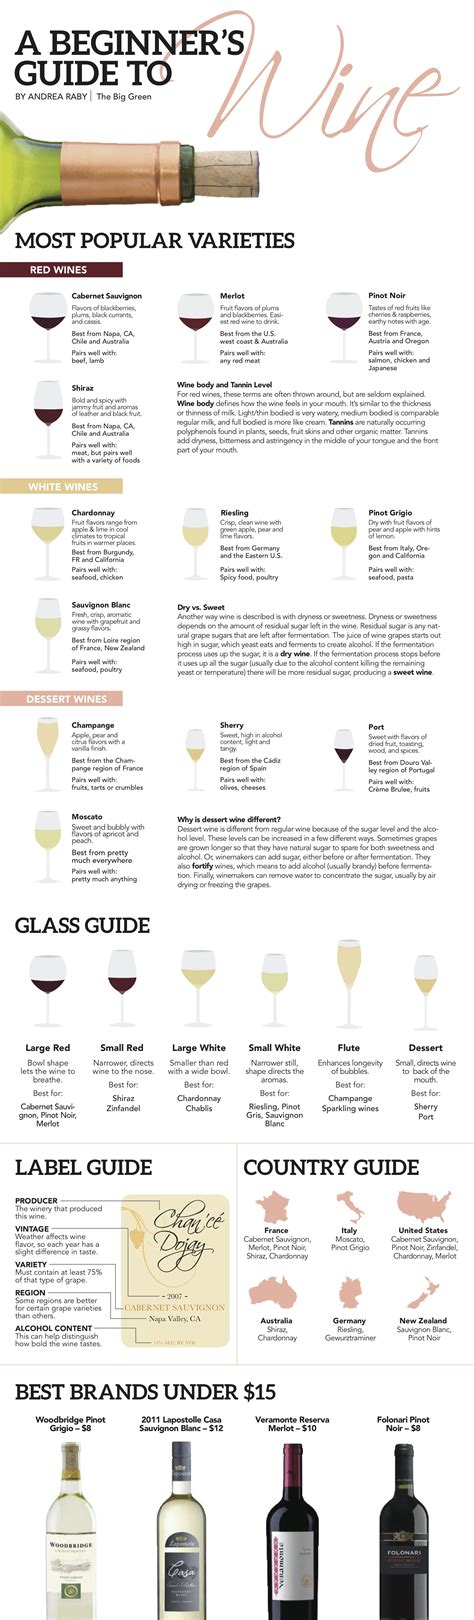 Guide to wine terminology an easy to understand glossary of. - Maintenance matters the guide to periodical payments upon divorce and dissolution of civil partnerships.